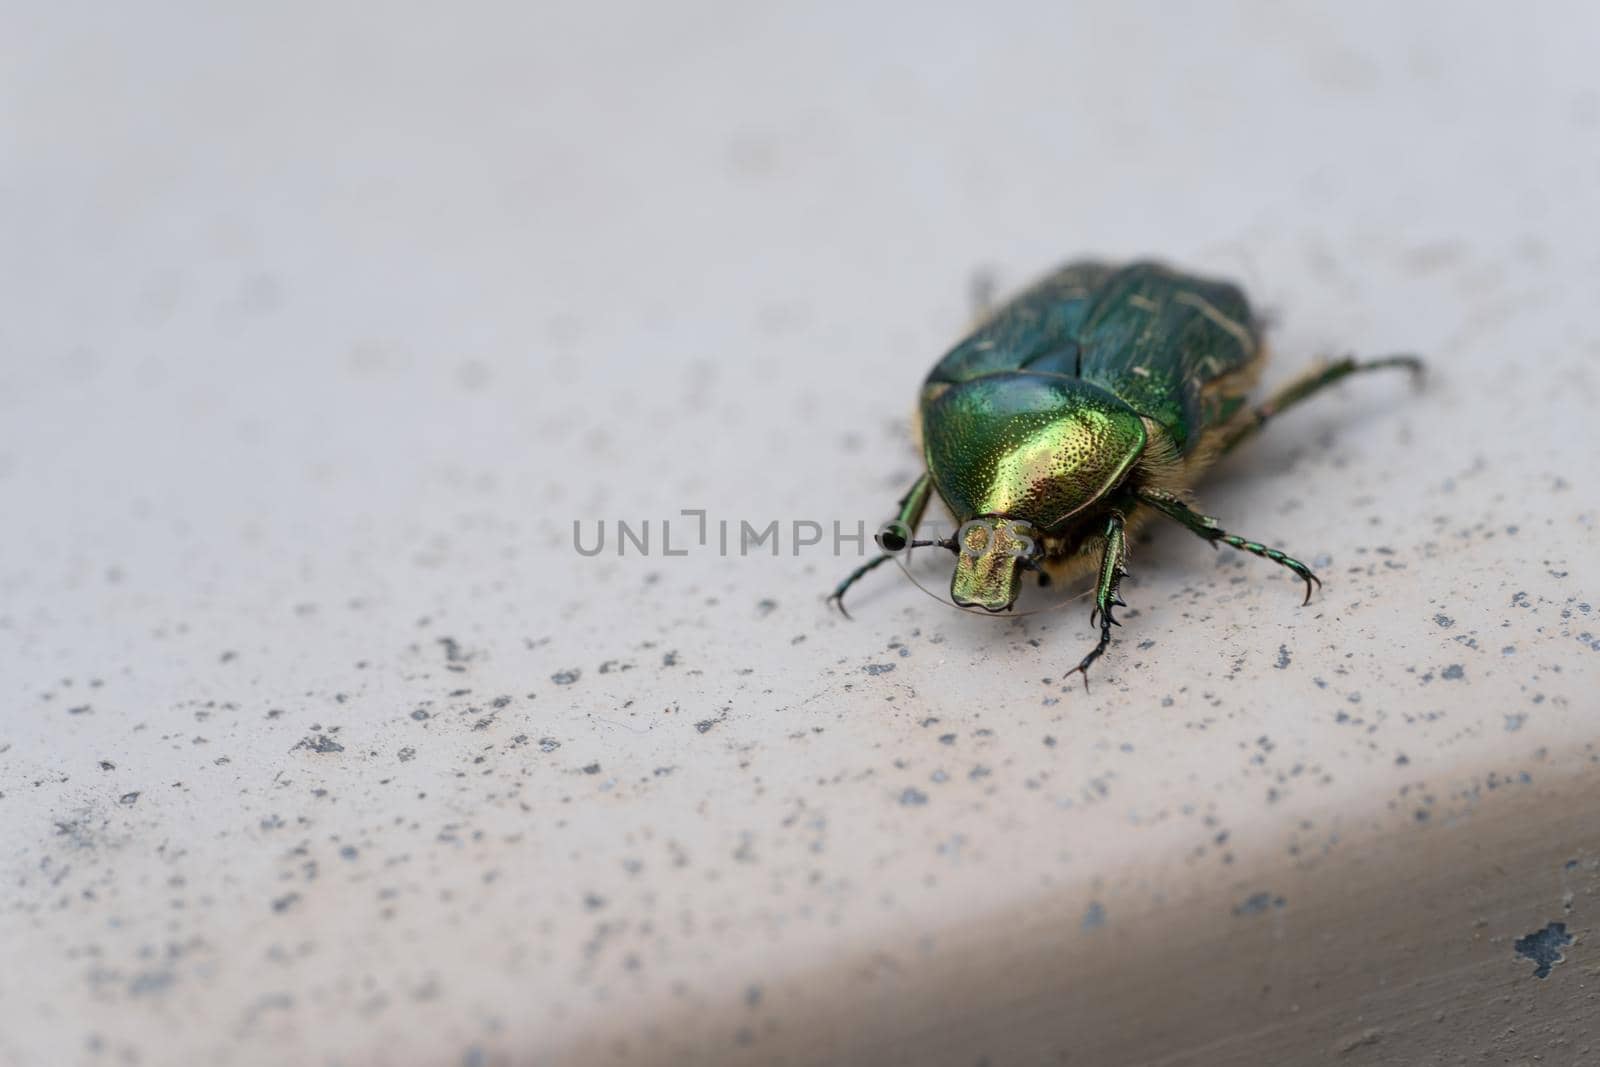 A close-up of a Green Rose Chafer ( Cetonia aurata ) a green metallic beetle on a stone underground by LeoniekvanderVliet